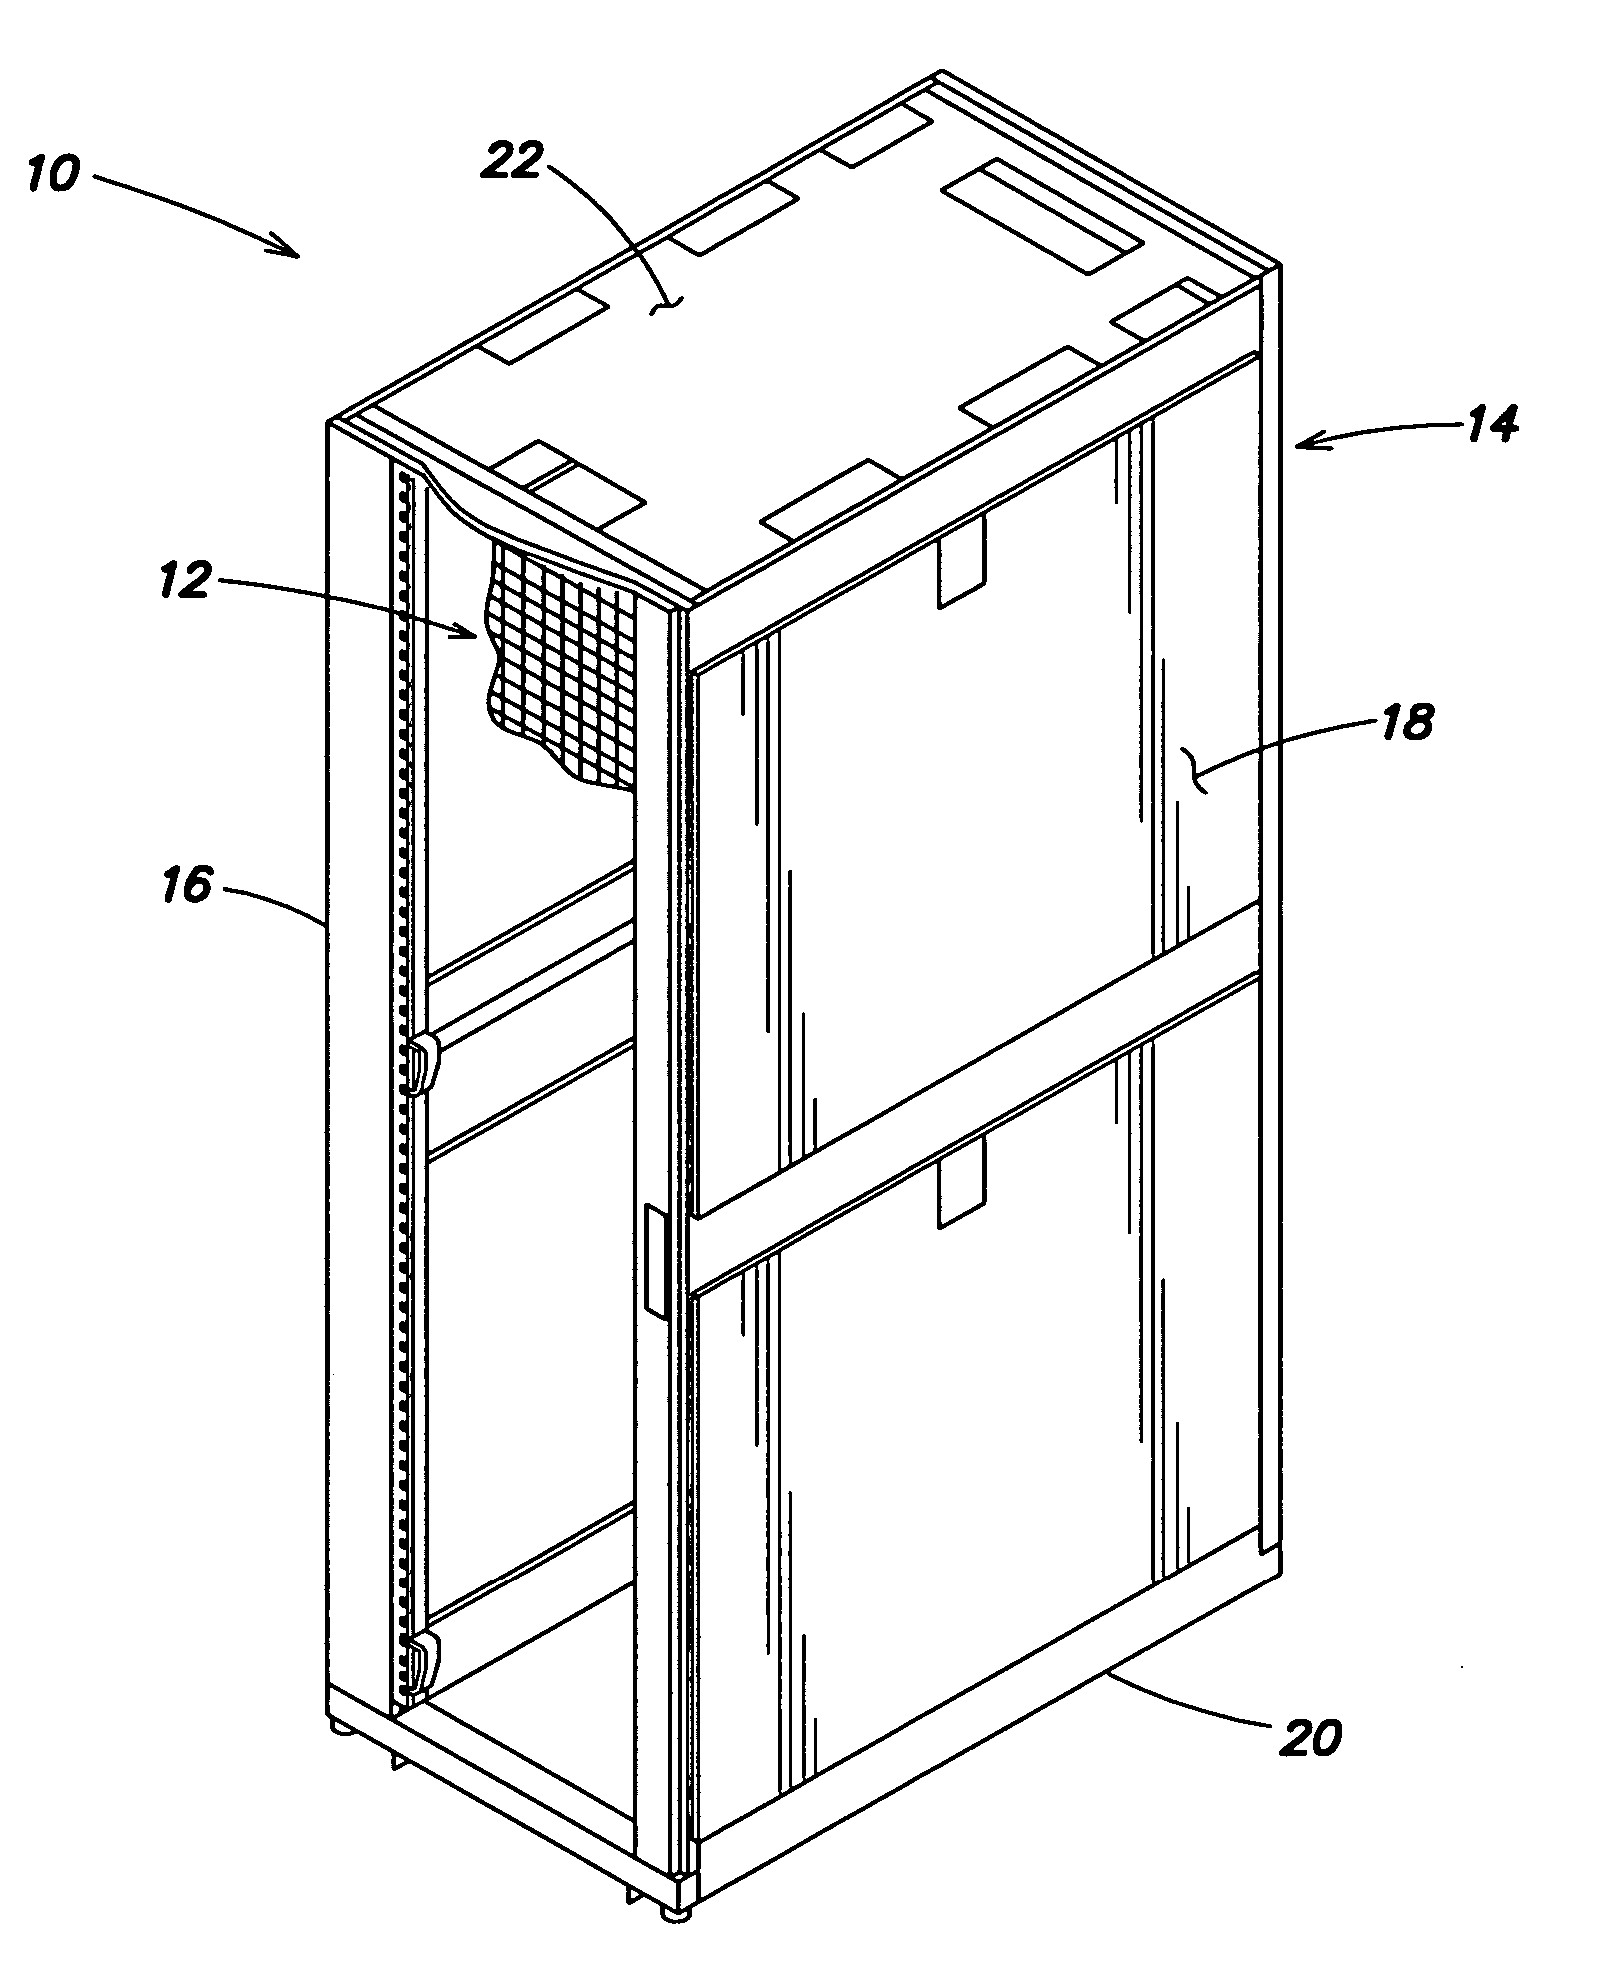 Equipment enclosure kit and assembly method